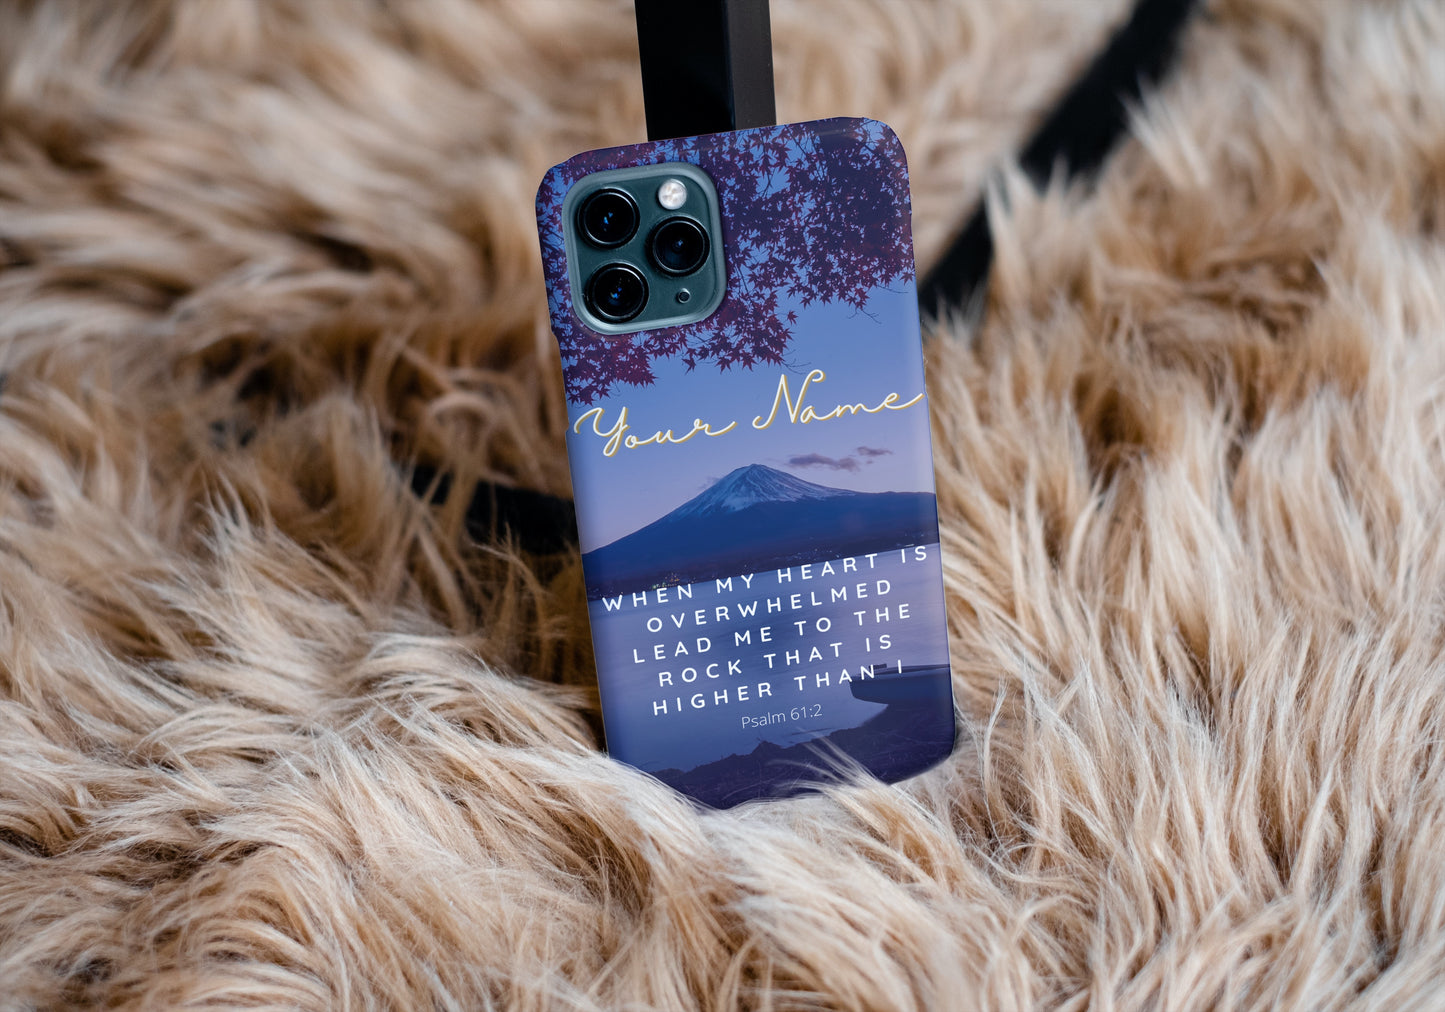 Rock Higher Than I Psalm Bible Verse iPhone Case | Christian Scripture Case for iPhone 11, iPhone 12, iPhone 13 | Psalm iPhone Case